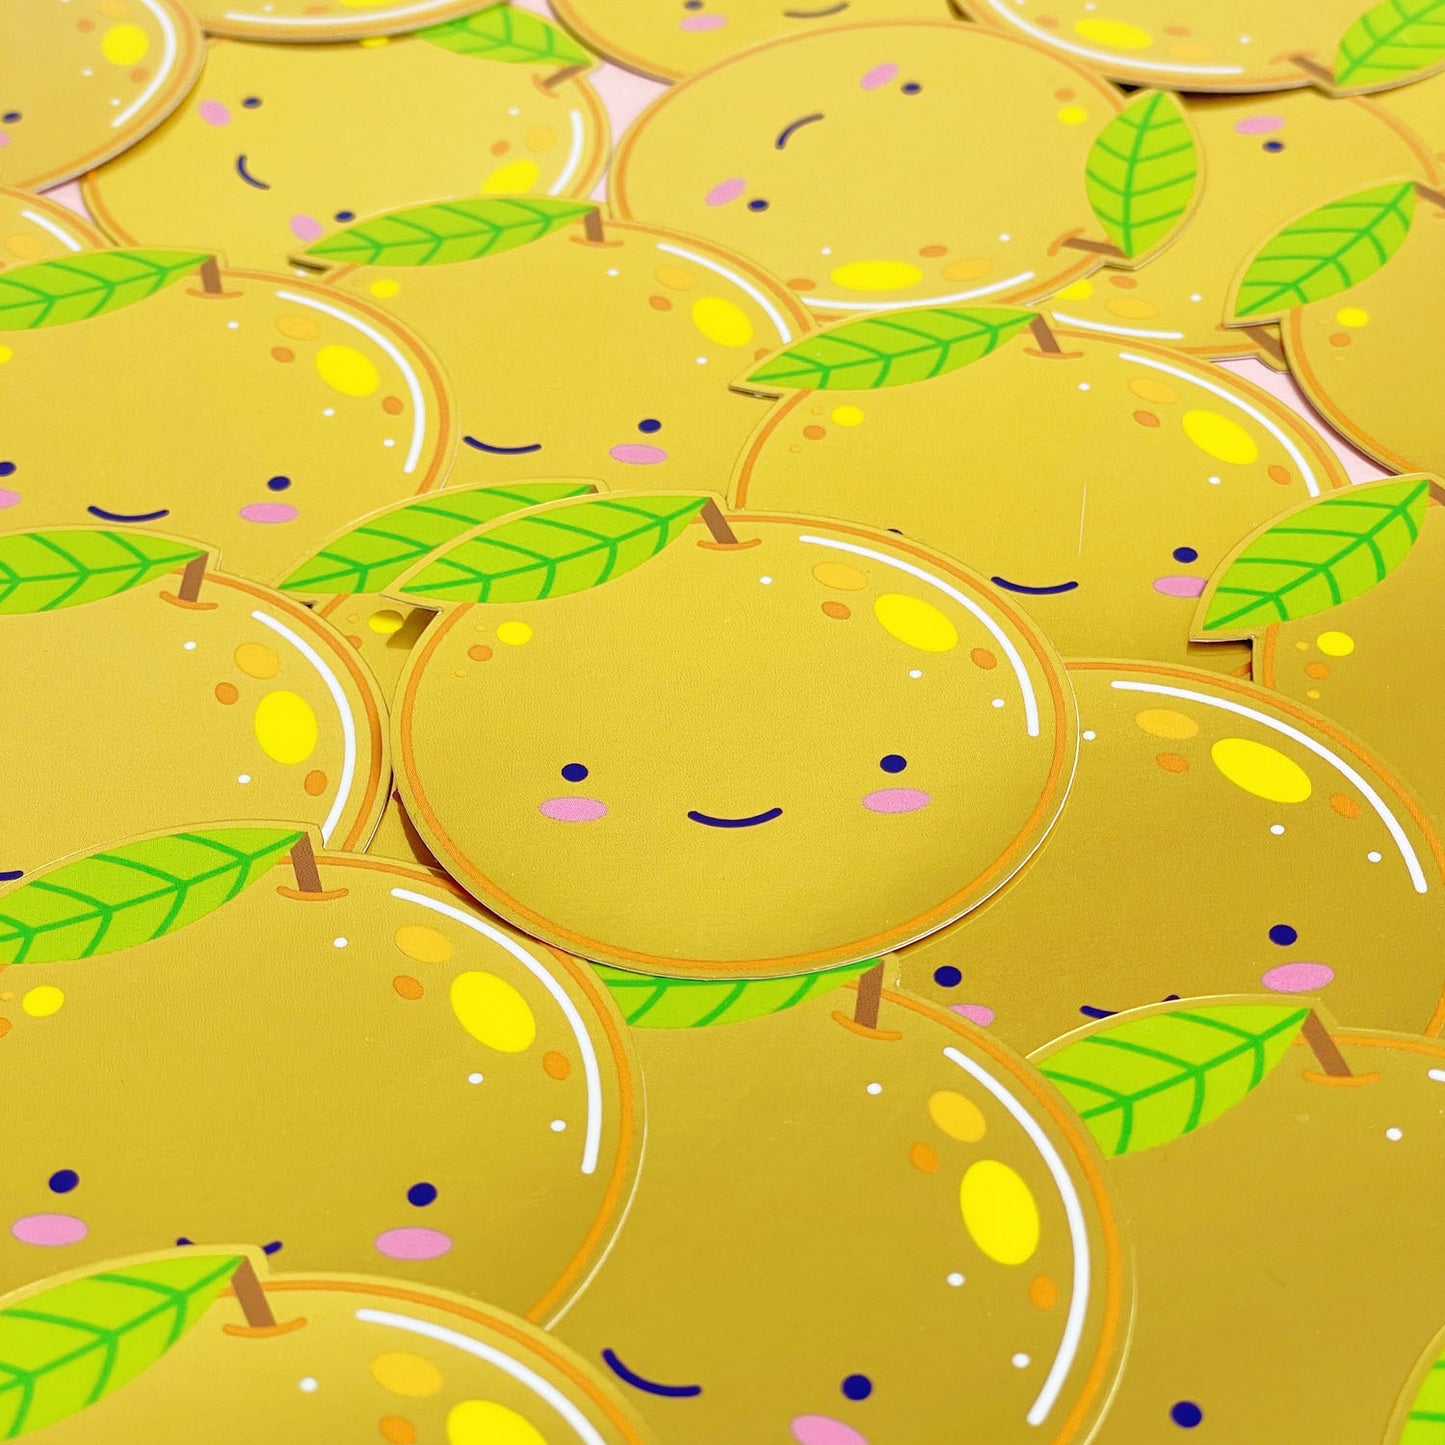 A pile of shiny mirror effect gold stickers featuring a smiling orange. The surface is covered with dozens of the same design.